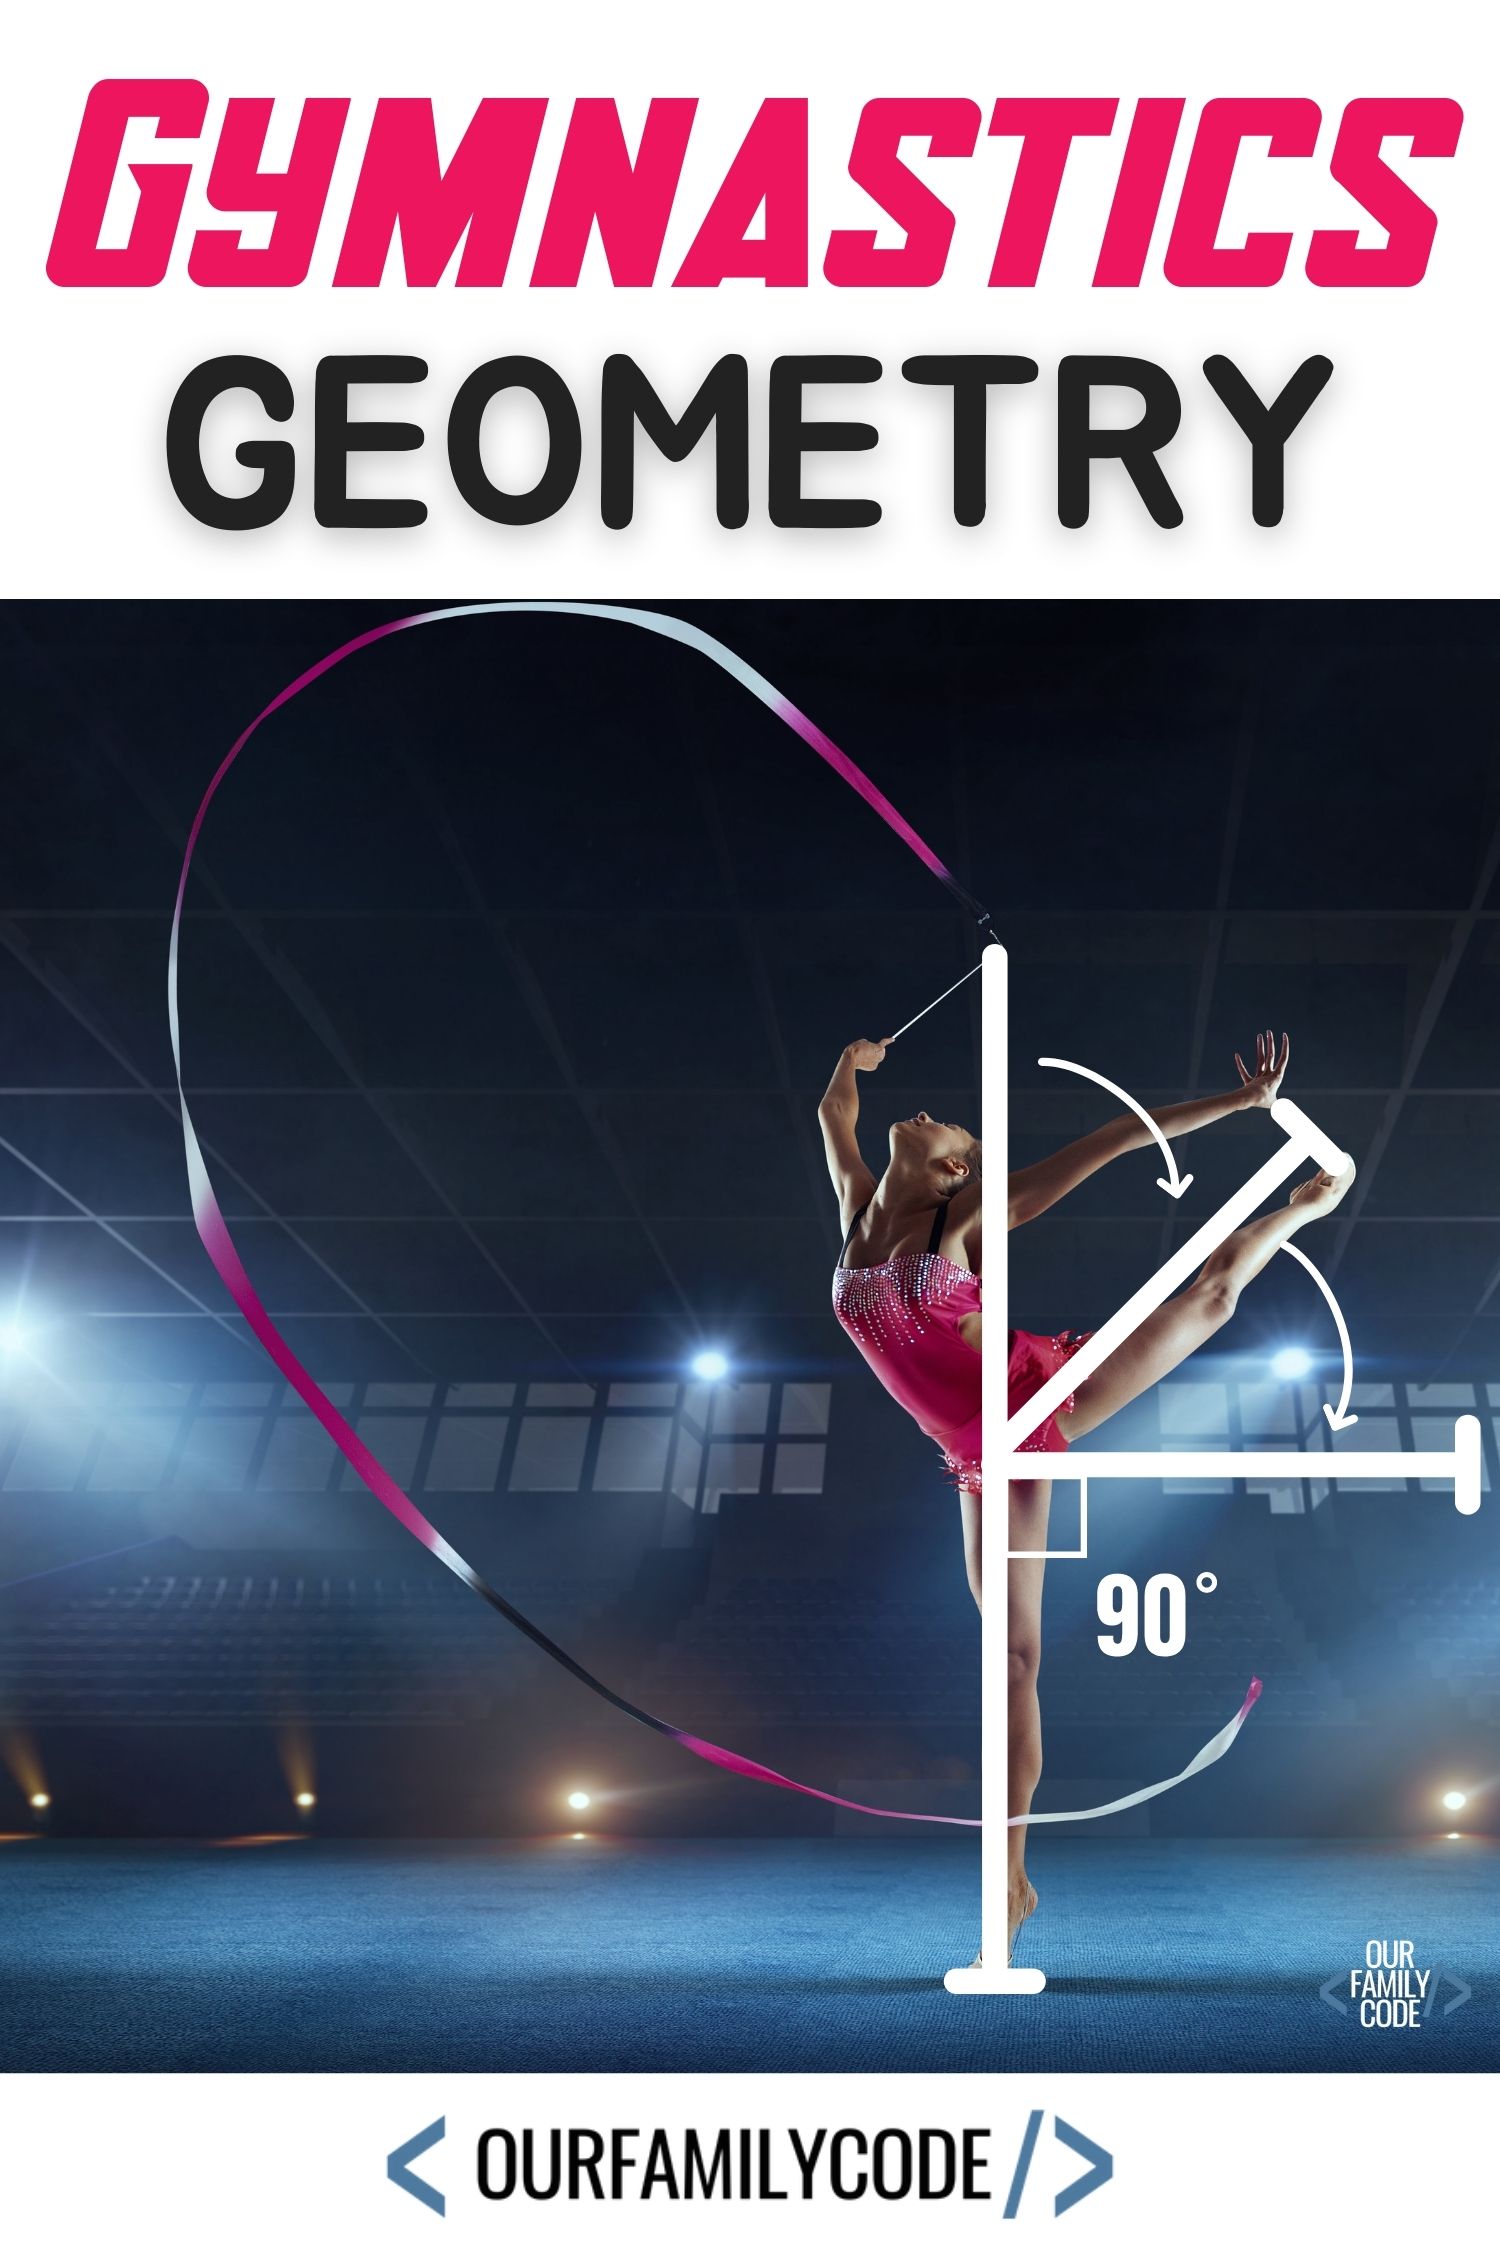 A picture of a rhythm gymnast with a ribbon dancing with leg angles marked and text that reads "Gymnastics Geometry".